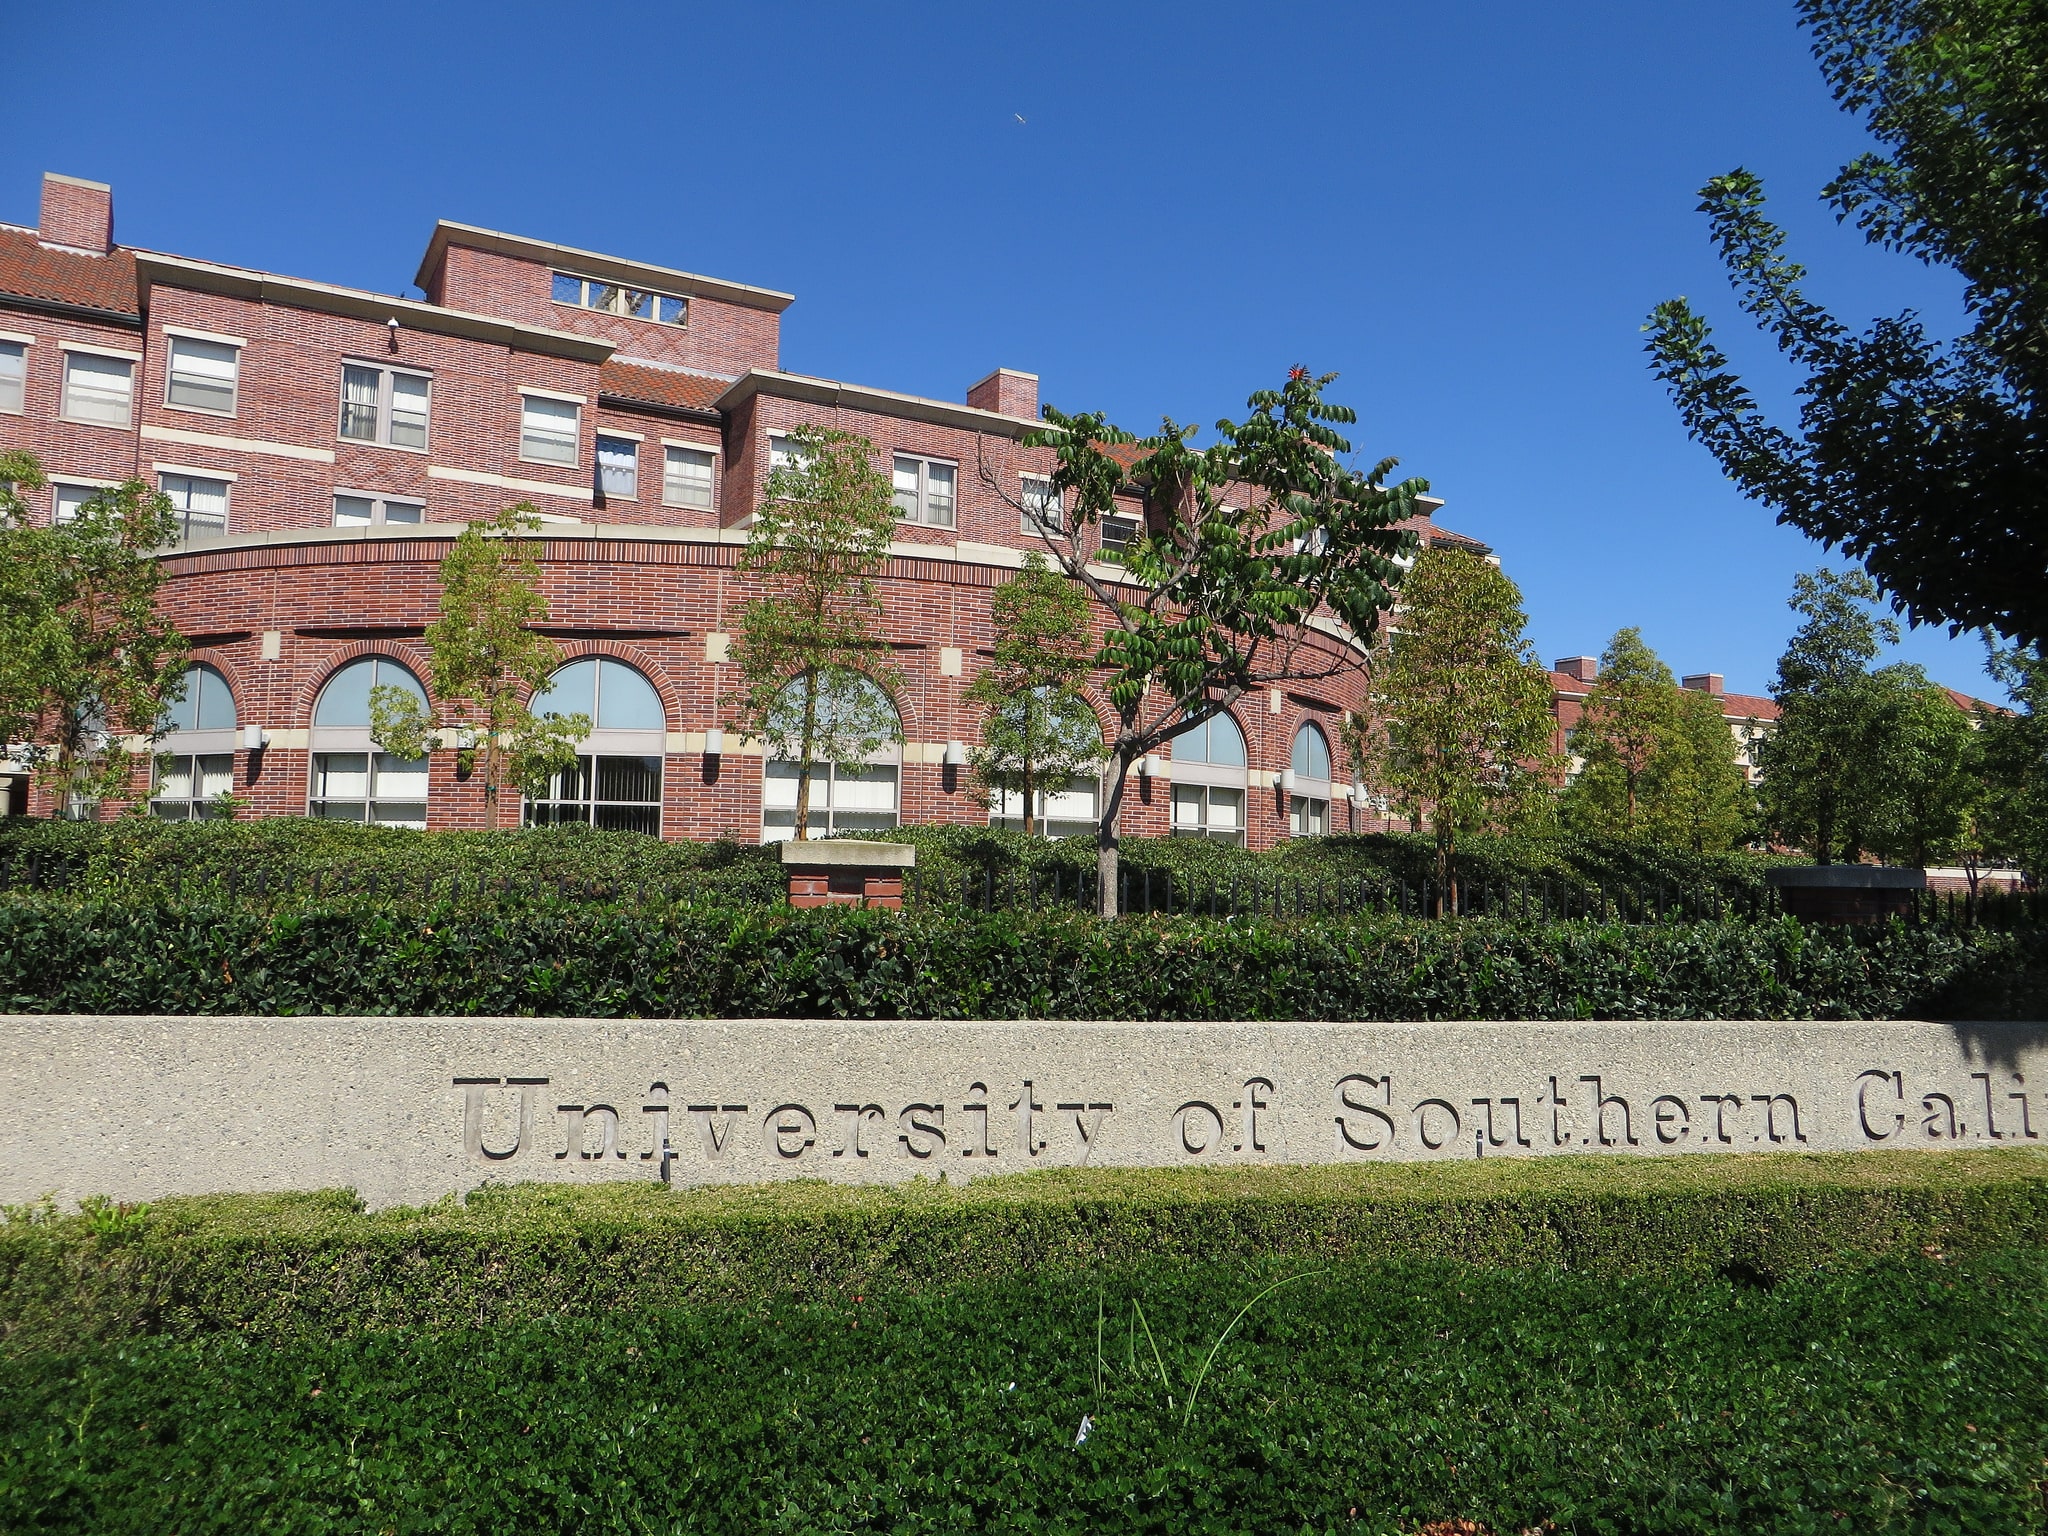 University of Southern California in Los Angeles, California